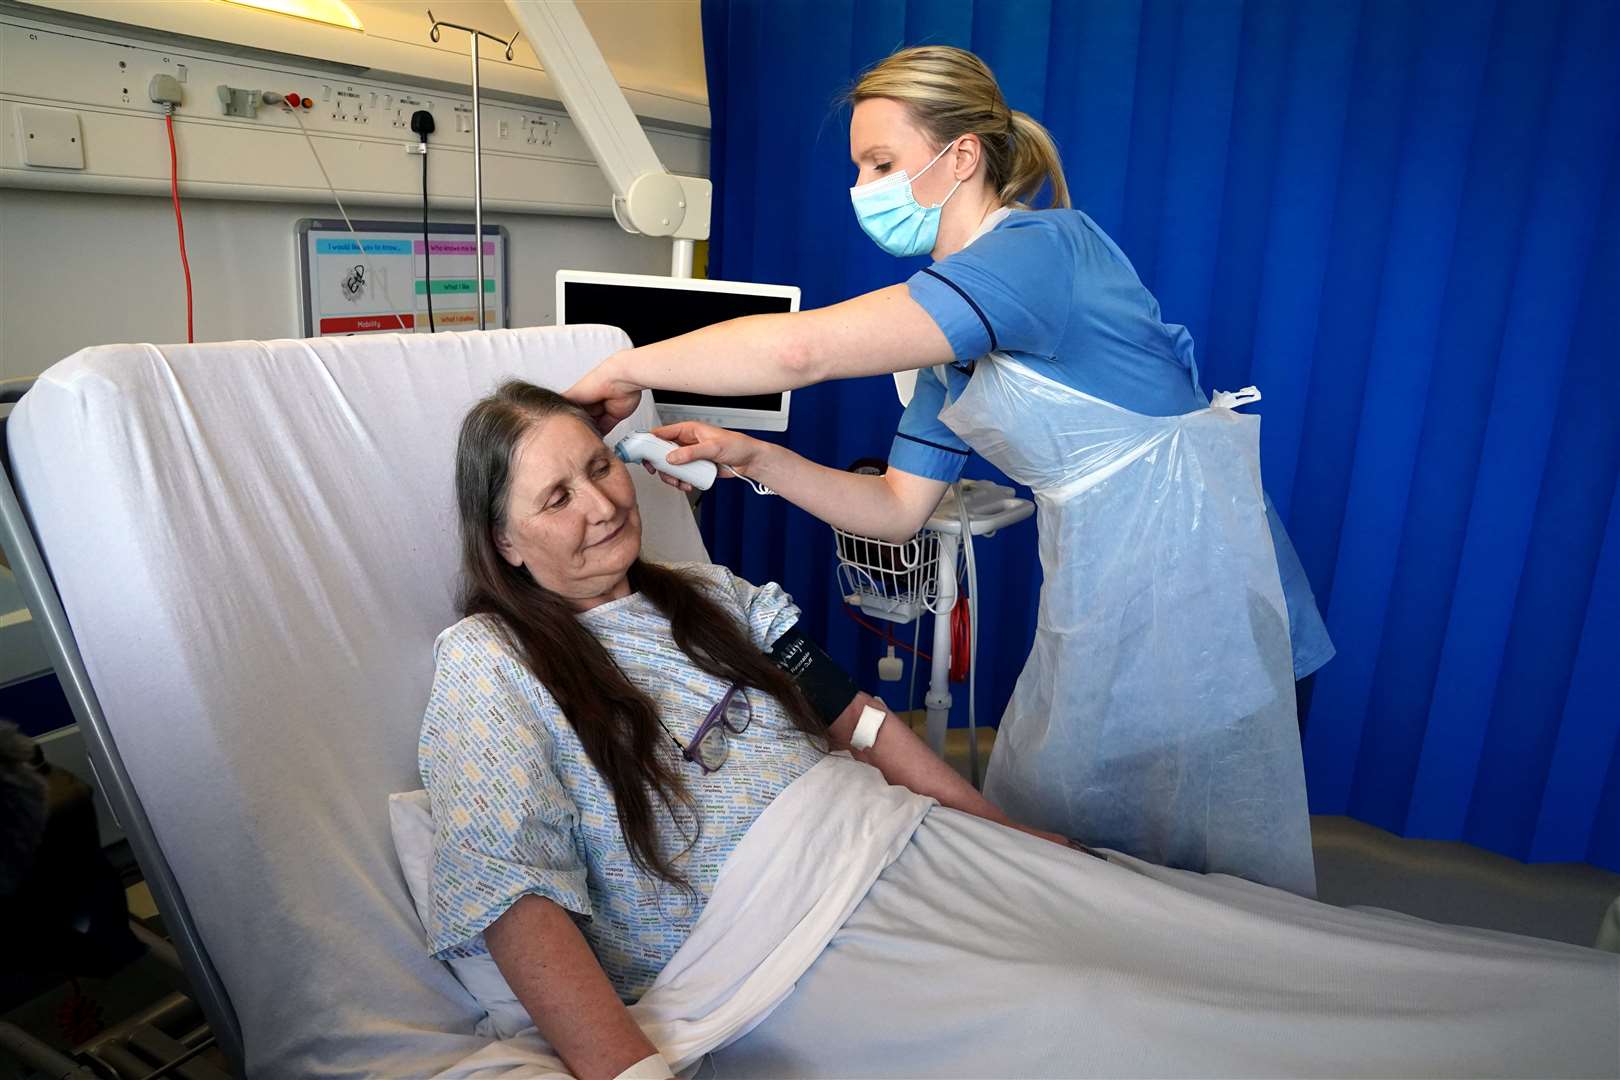 Vicky Wright said she wanted to ‘fully invest’ in her family and her nursing career (Andrew Milligan/PA)